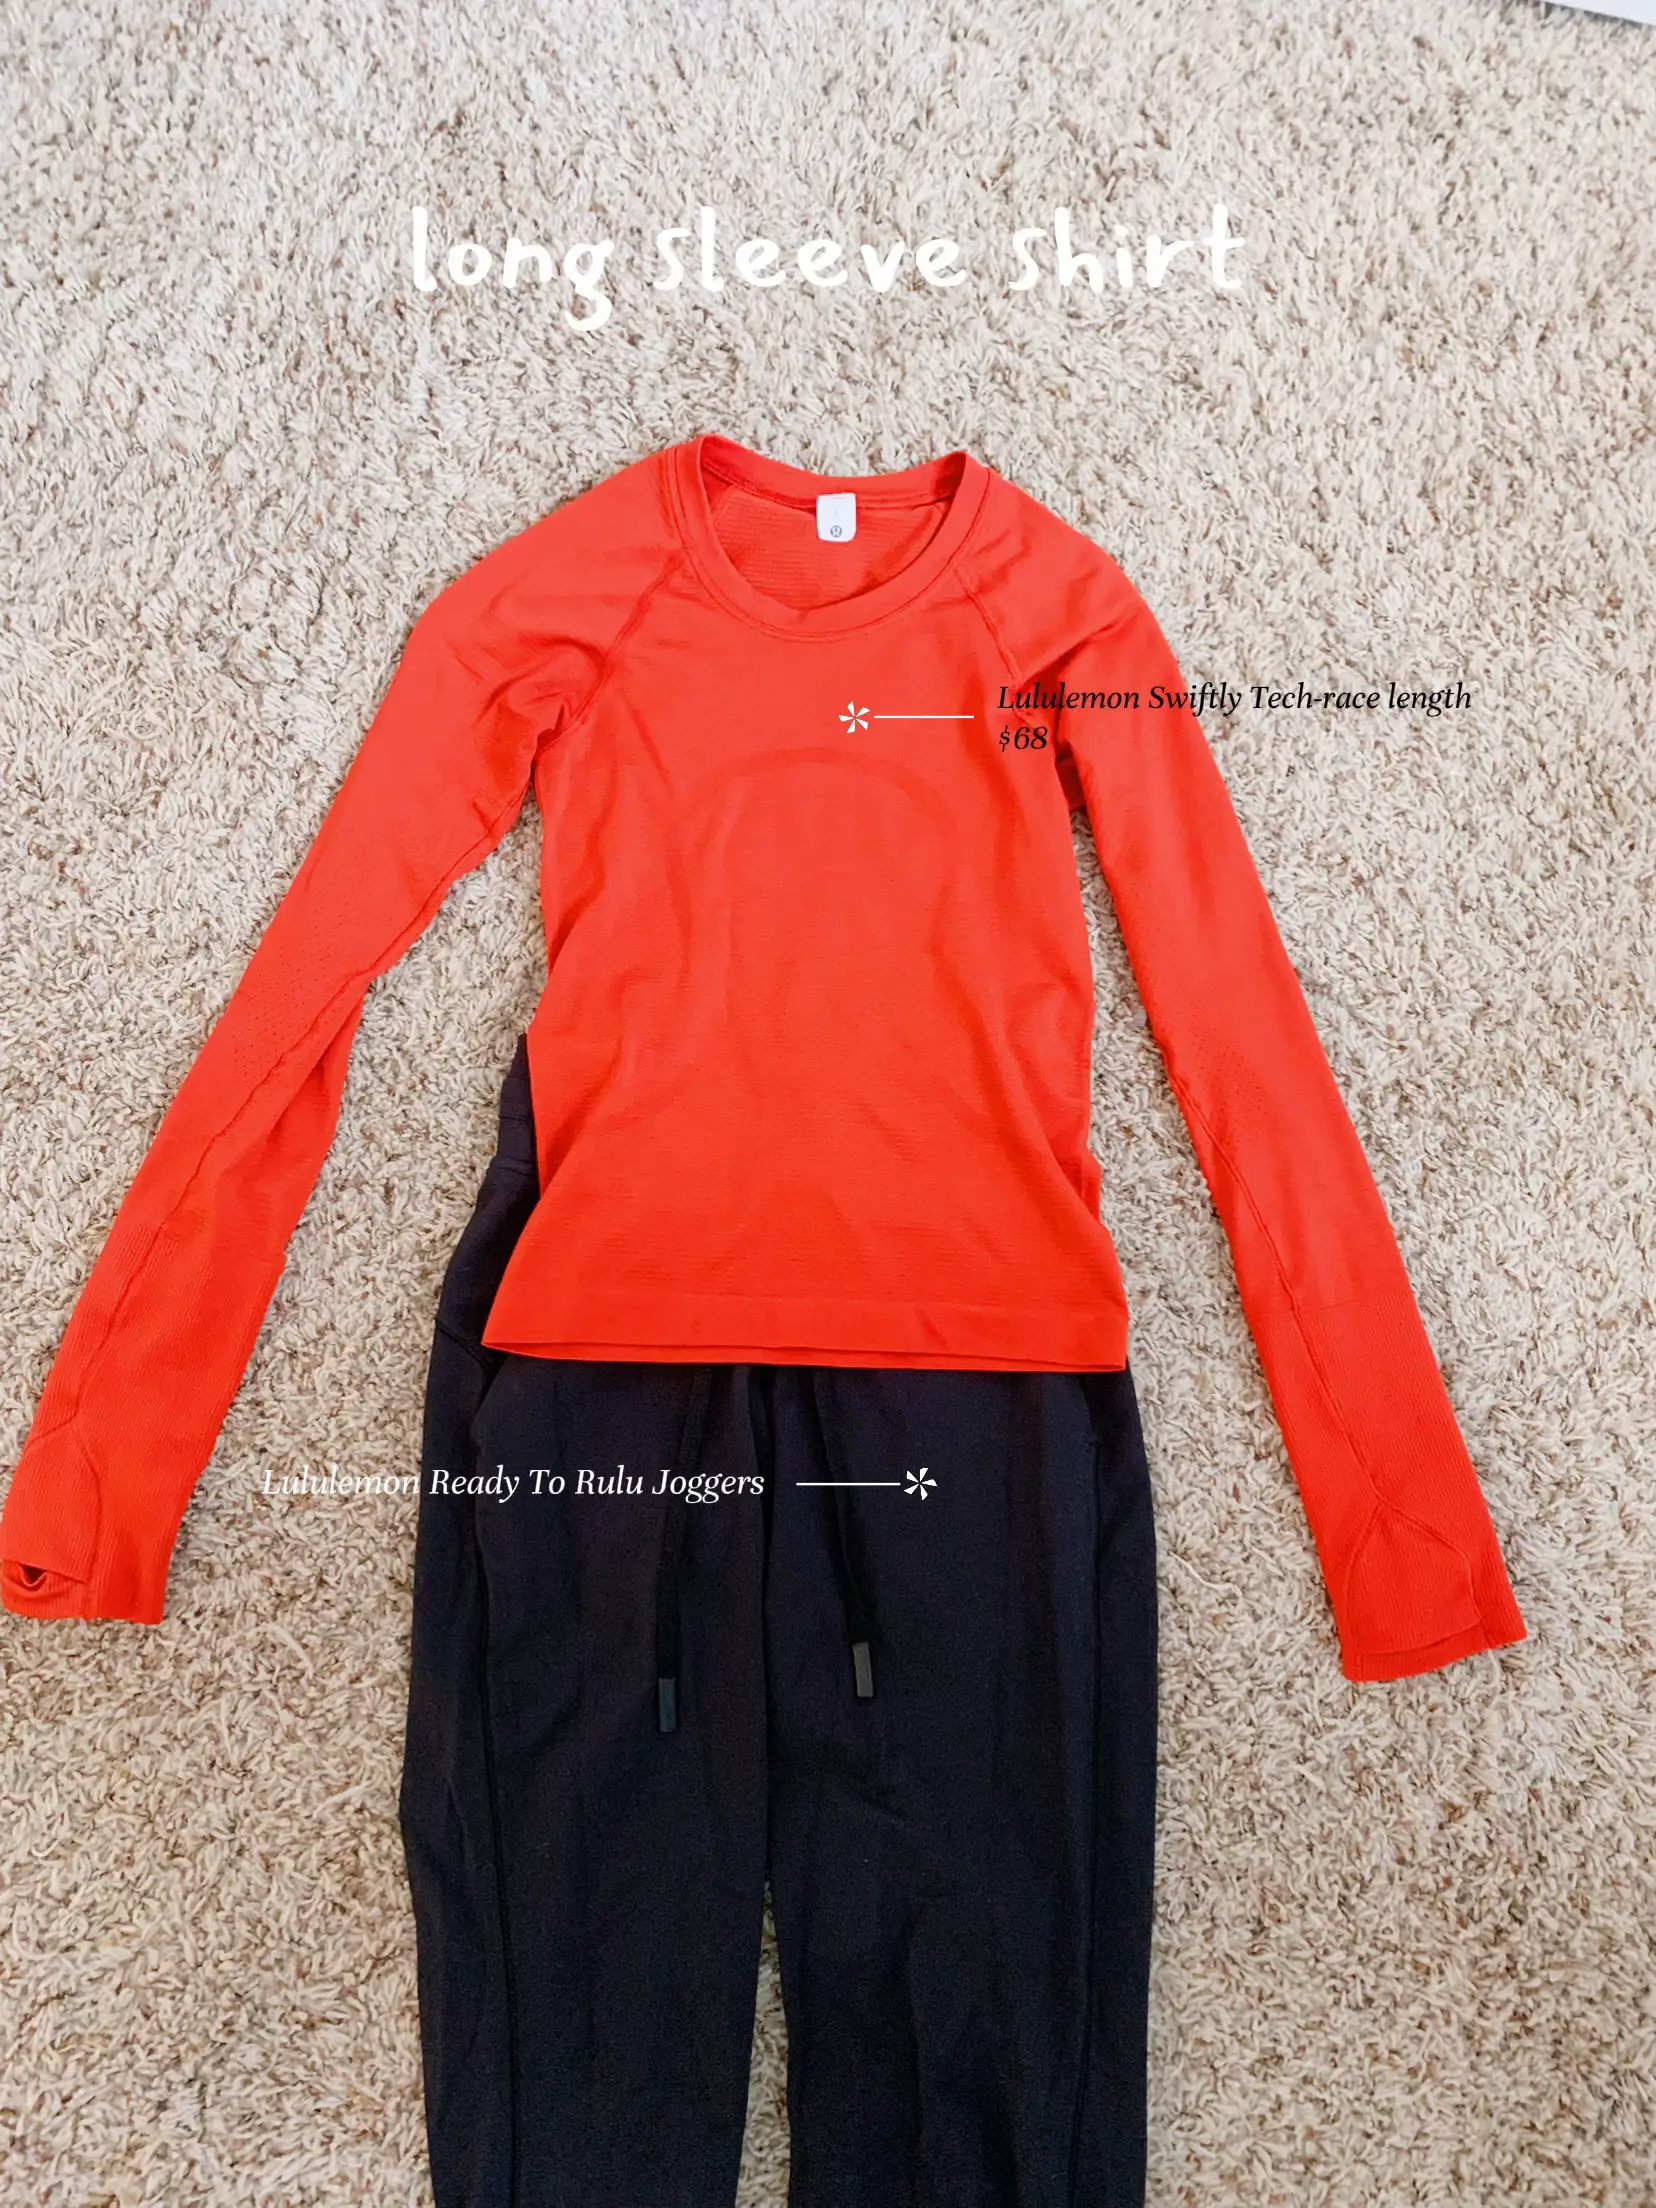 LULULEMON Ready To Rulu Joggers Bundle for Sale in Los Angeles, CA